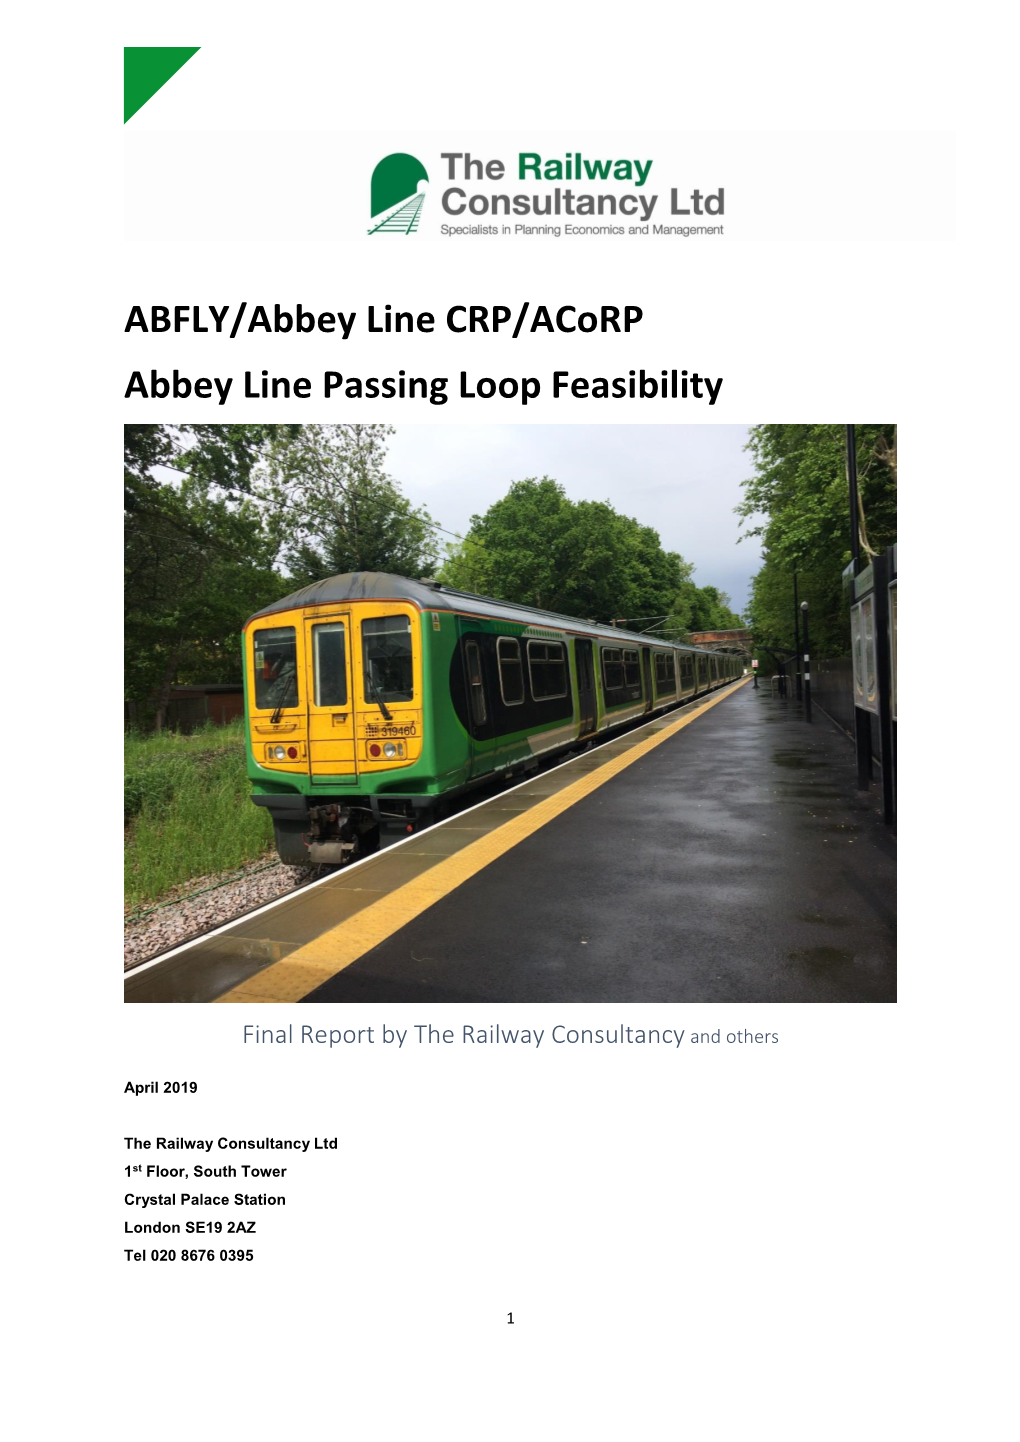 ABFLY/Abbey Line CRP/Acorp Abbey Line Passing Loop Feasibility